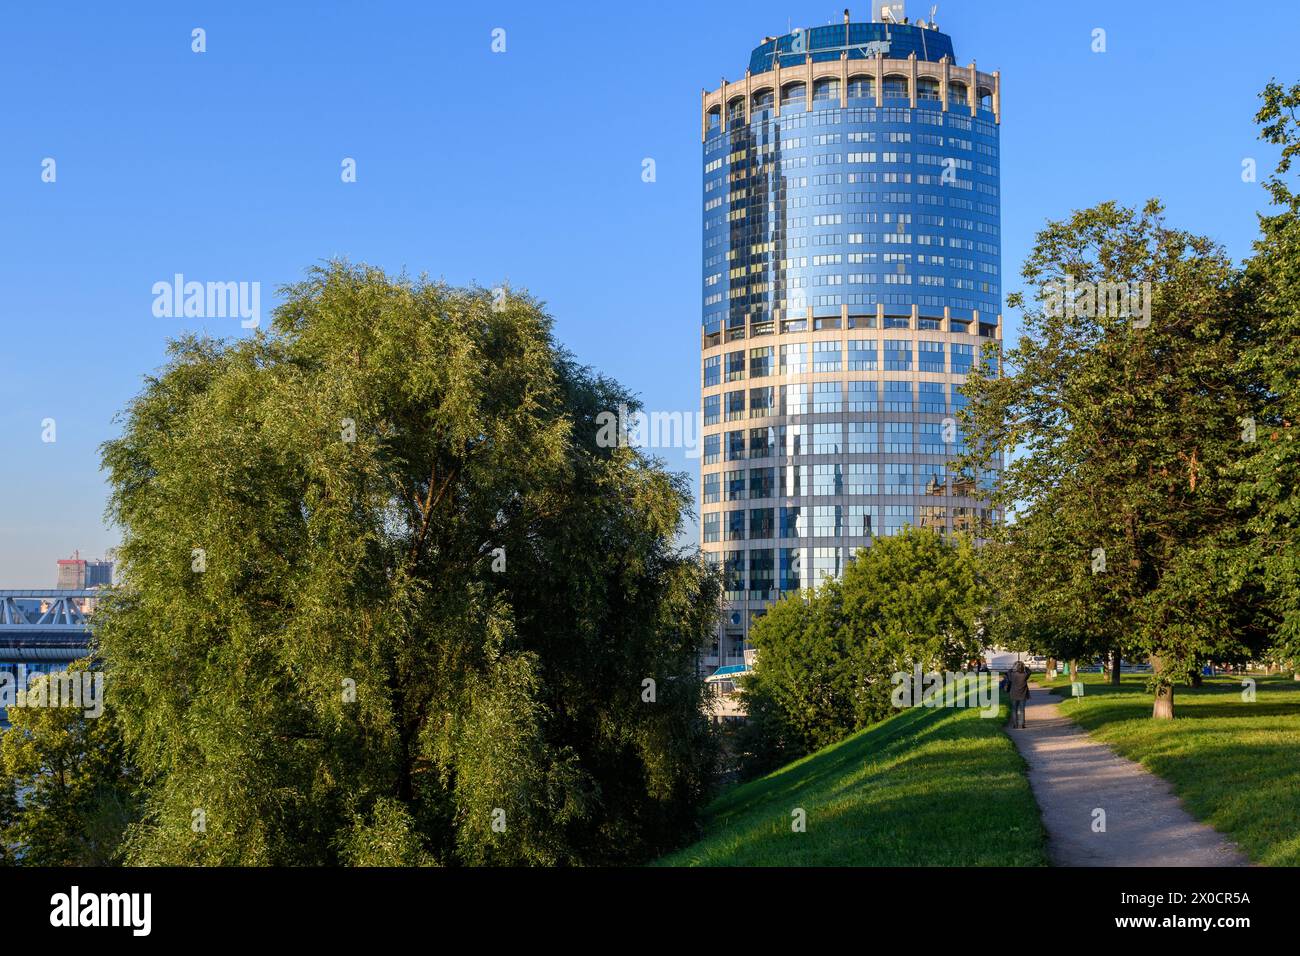 Moscow, Russia - 31 Aug 2017: A modern architectural marvel stands tall, juxtaposed against the serene beauty of lush greenery and a tranquil walking Stock Photo